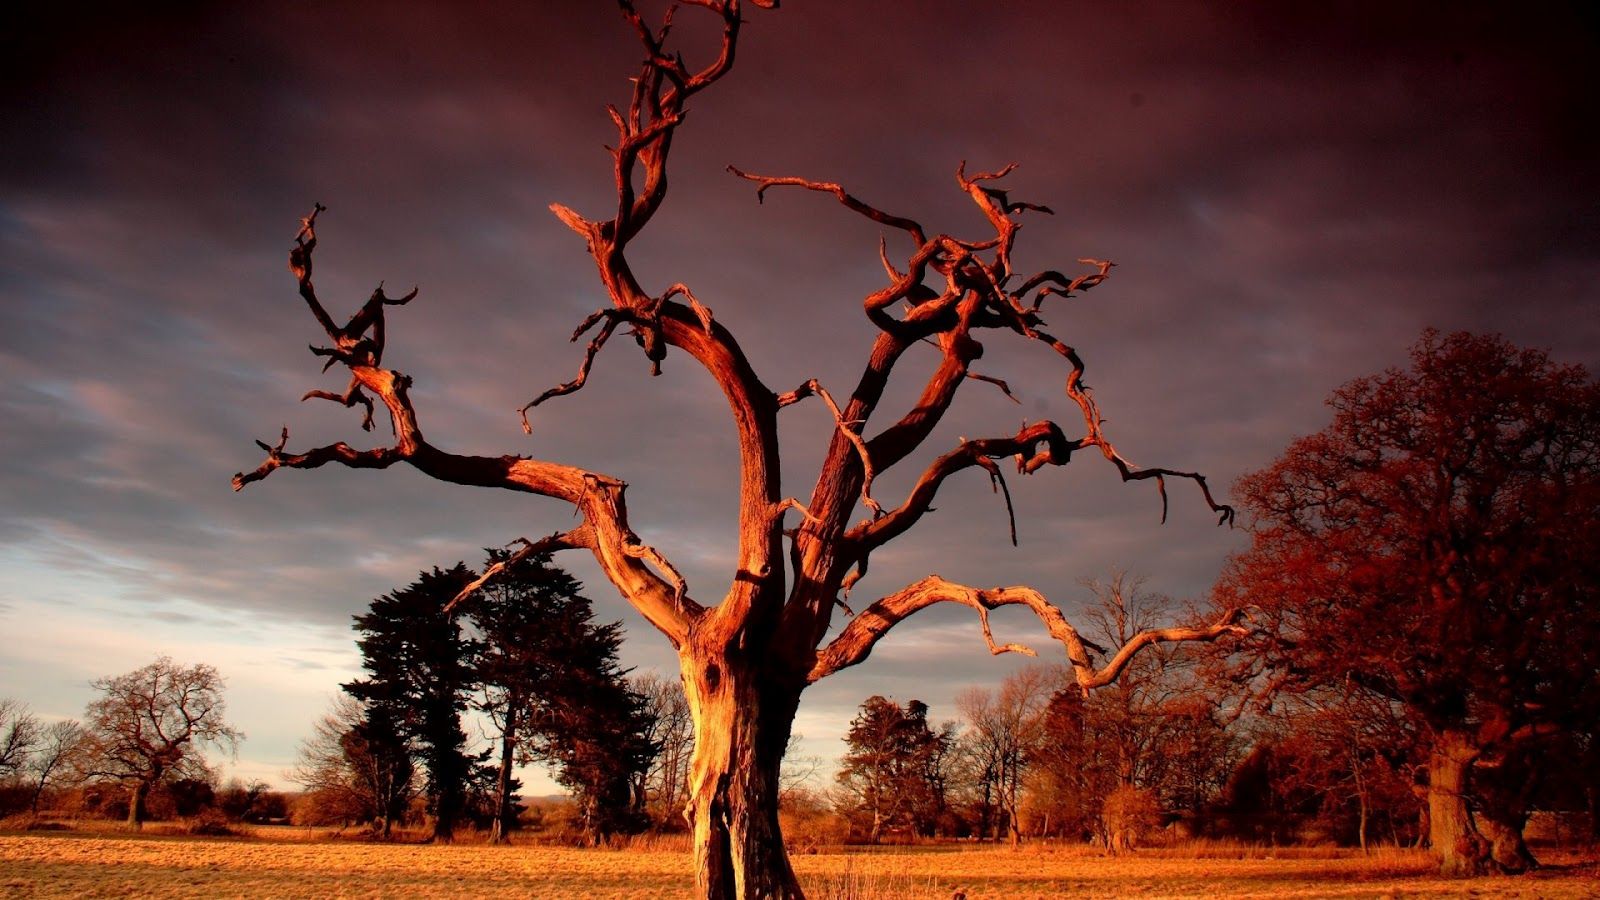 Red Sunset Over a Dry Tree